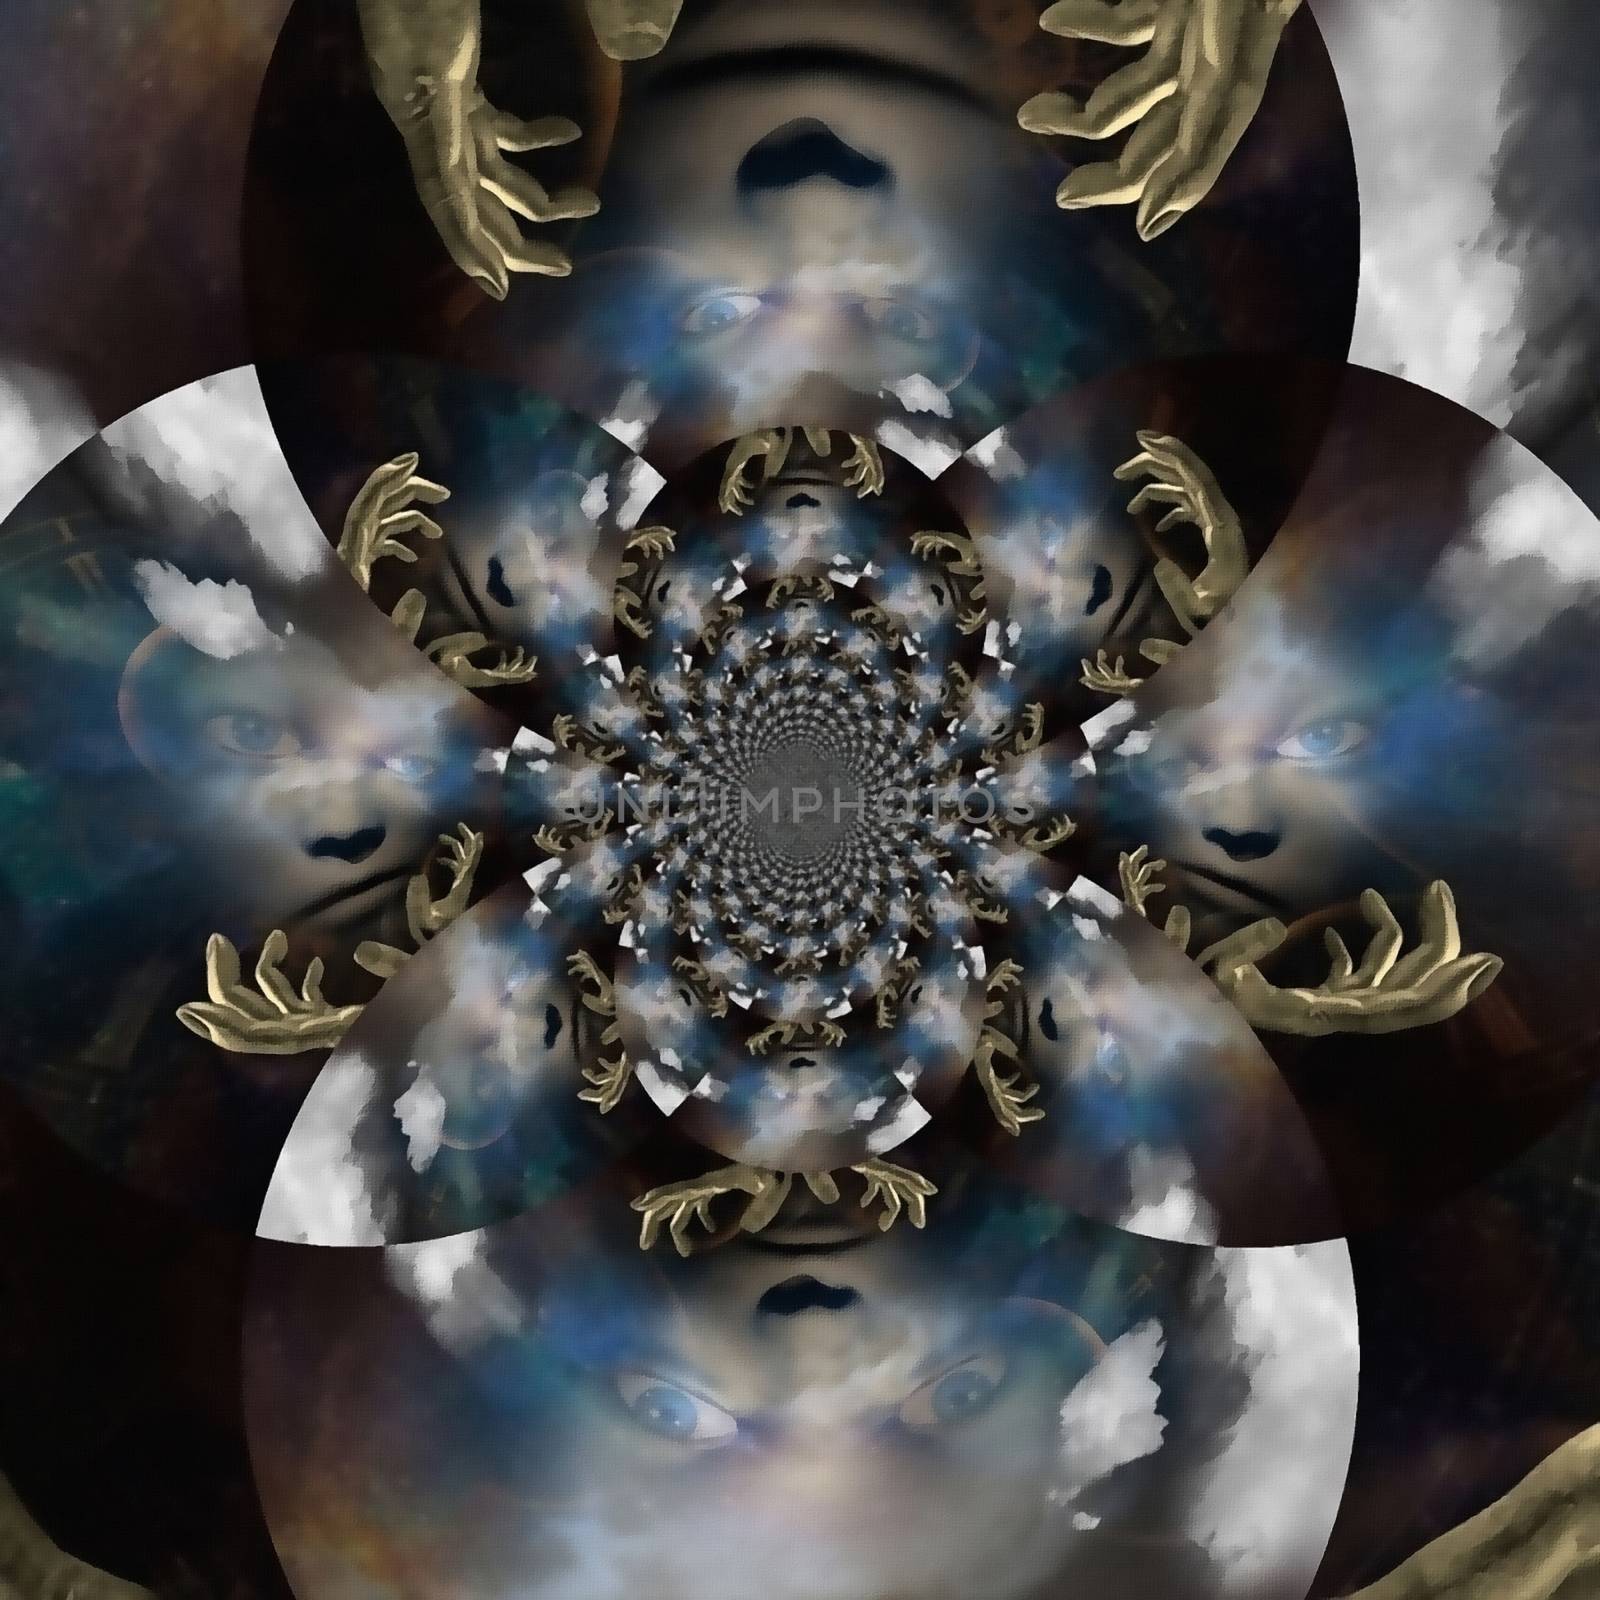 Mystic faces. Mirrored fractal composition